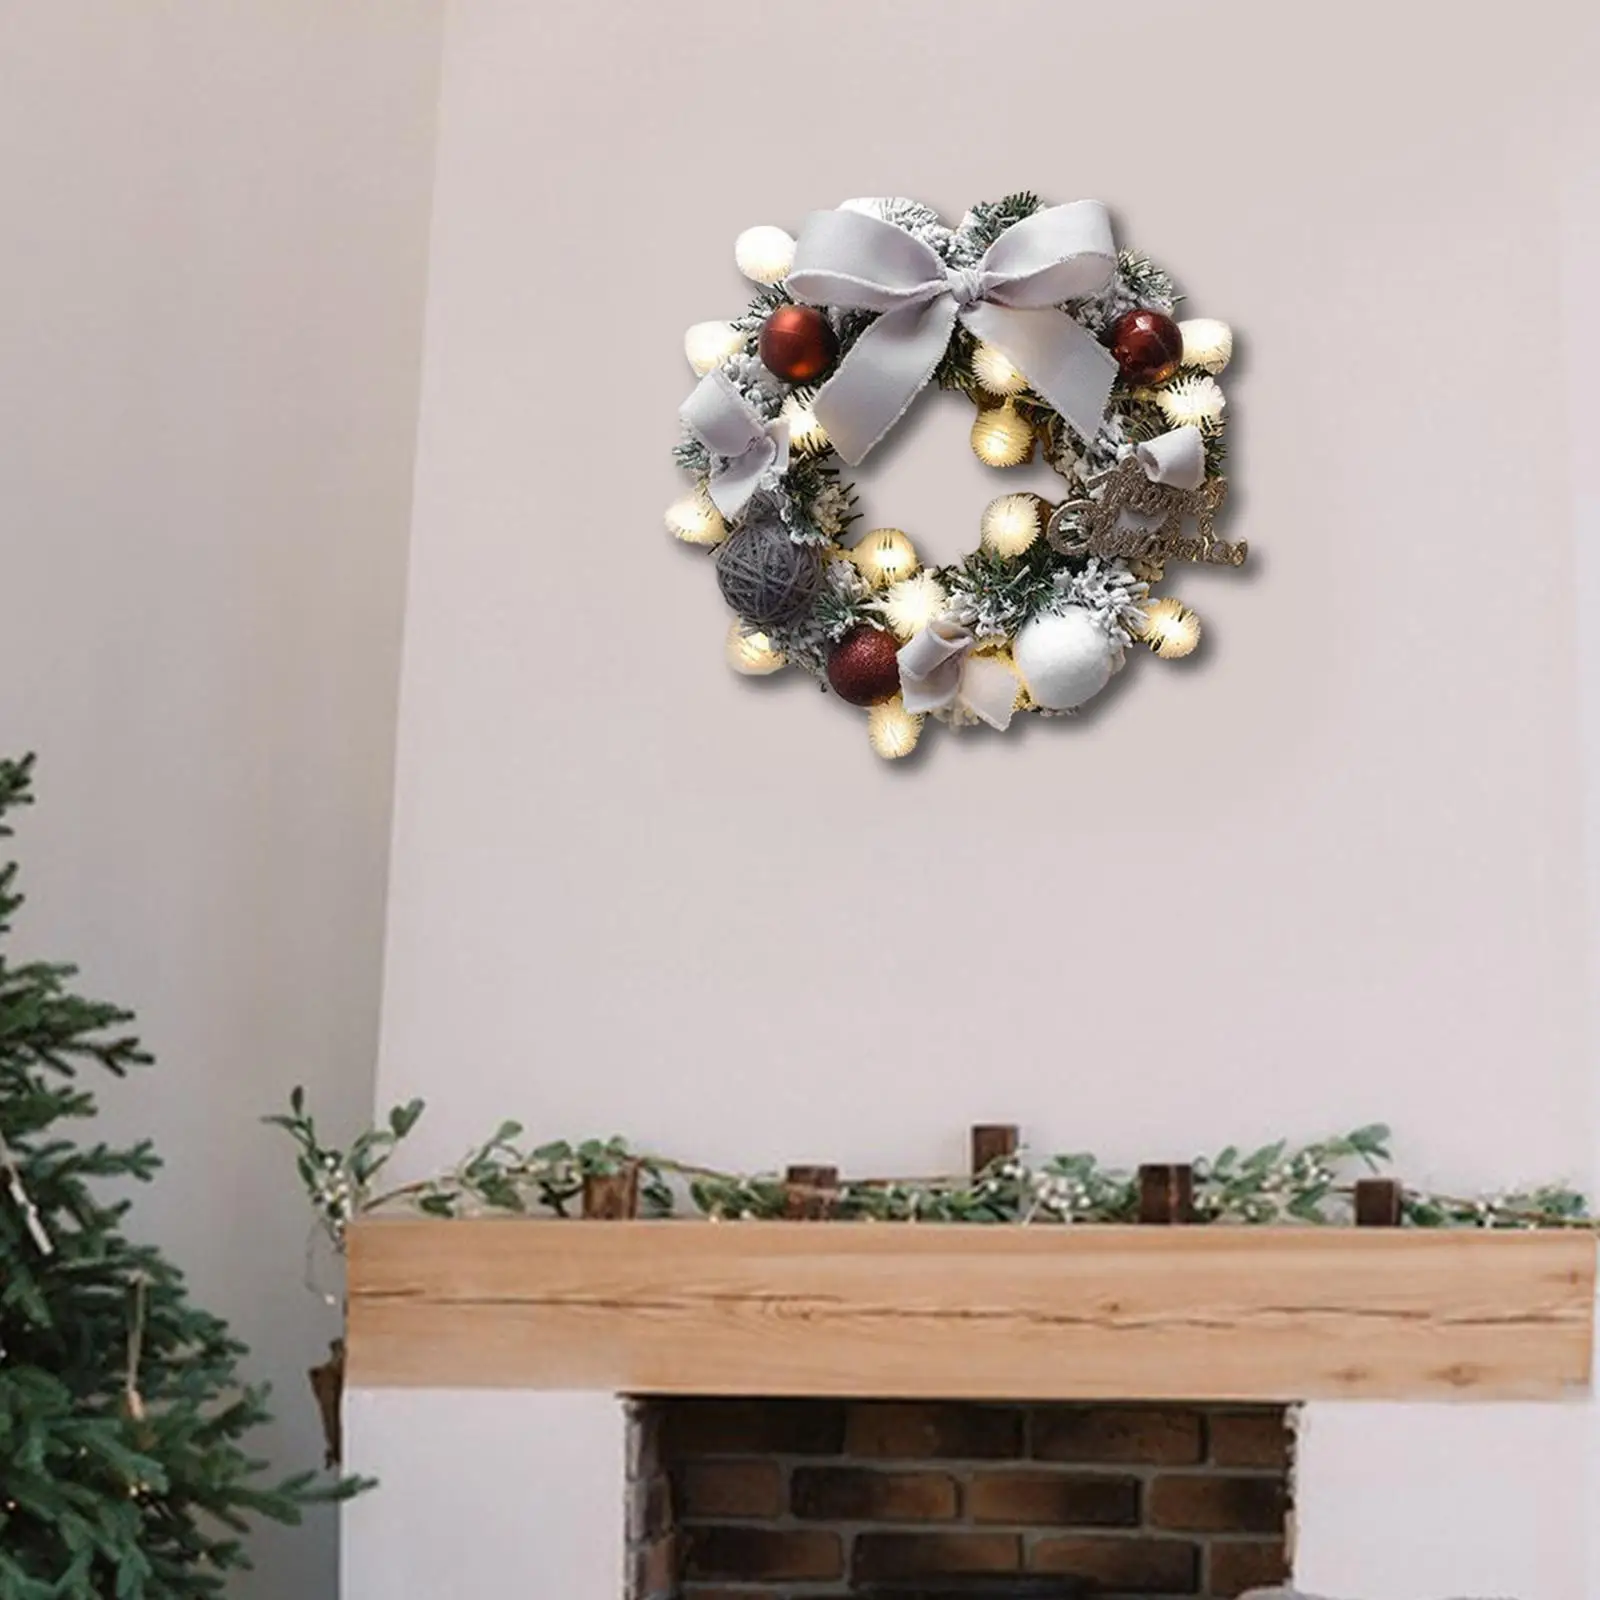 Christmas Wreath with String Light Decor Housewarming Door Ornaments Holiday Garland for Dining Room Bedroom Garden Hotel Porch